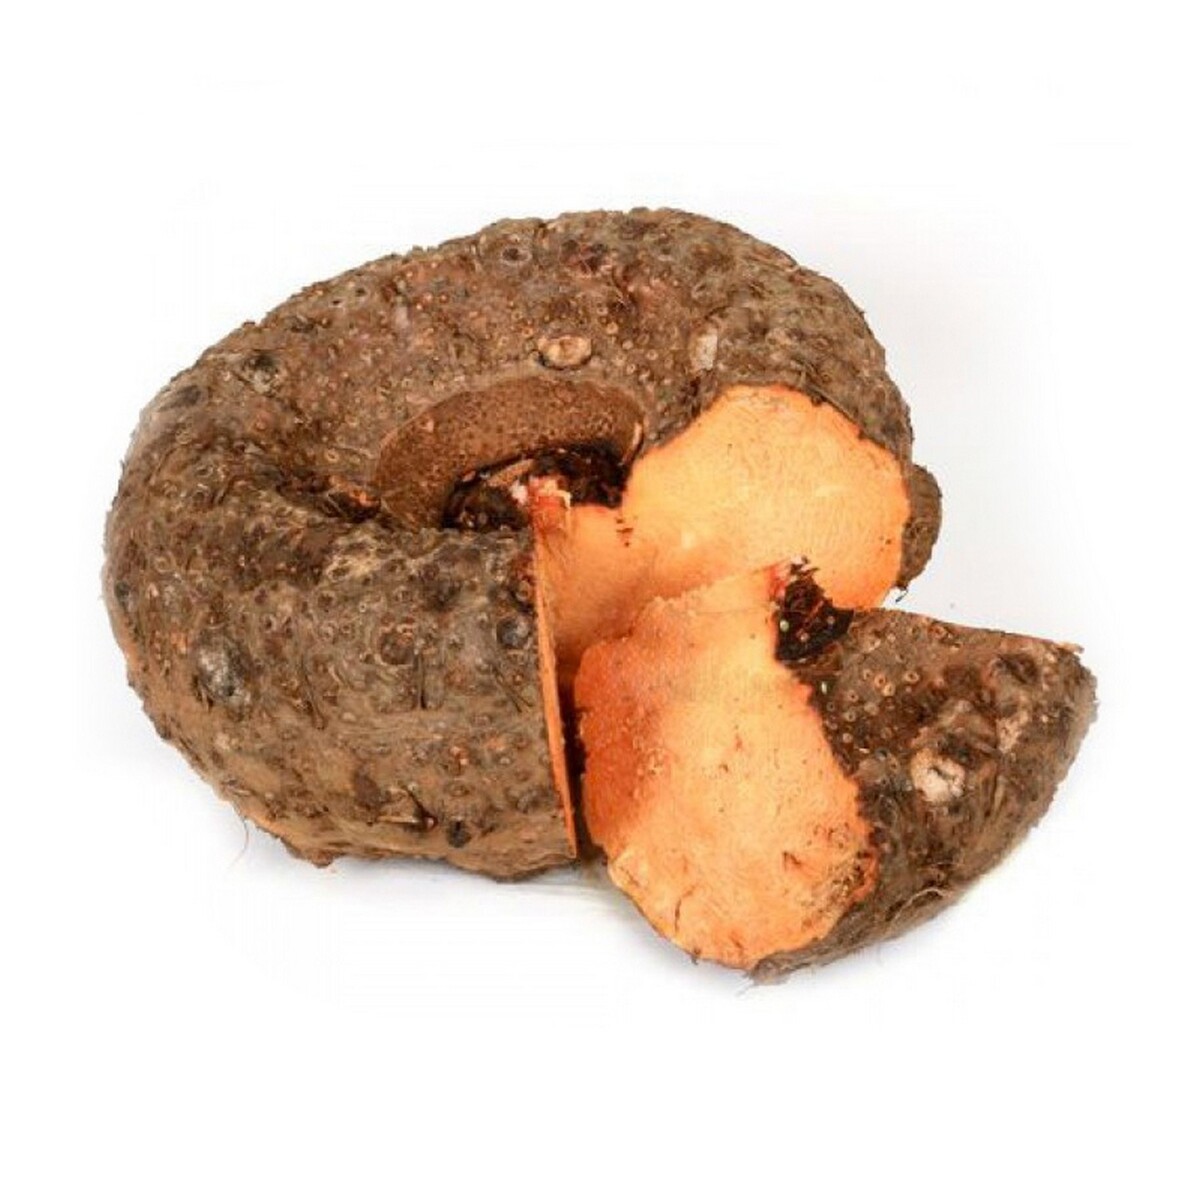 Yam Approx 550g-600g